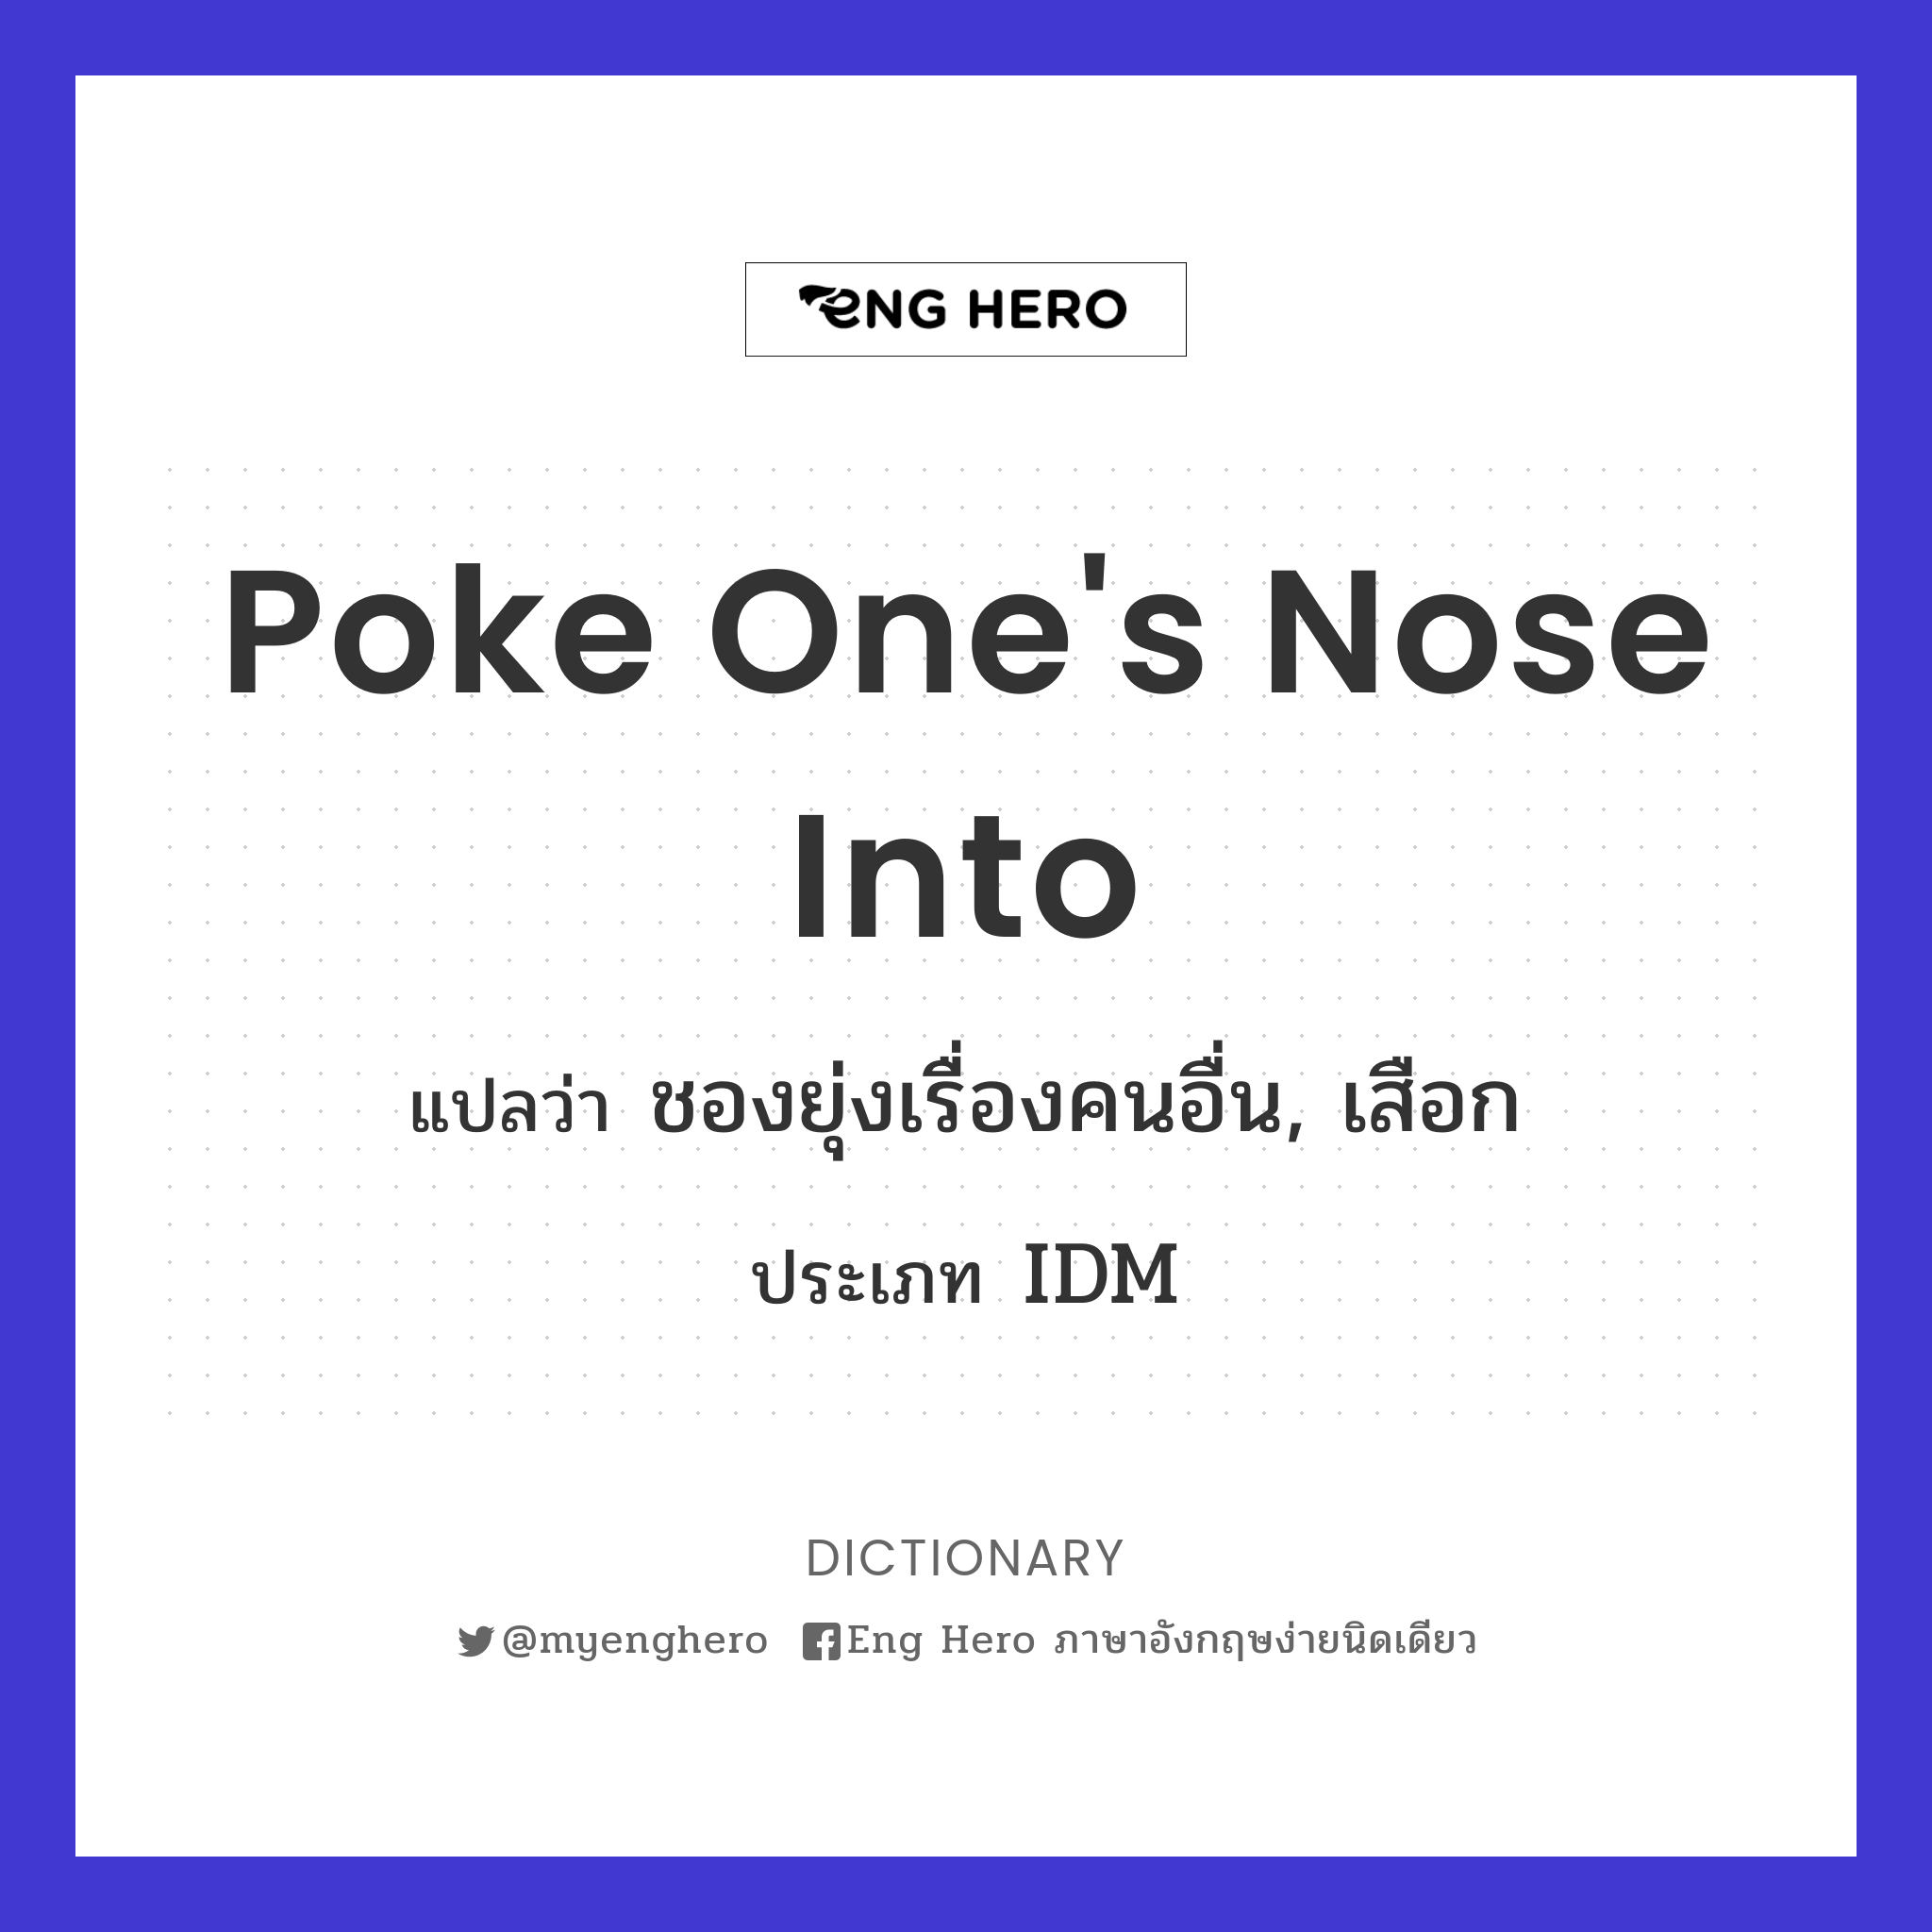 poke one's nose into